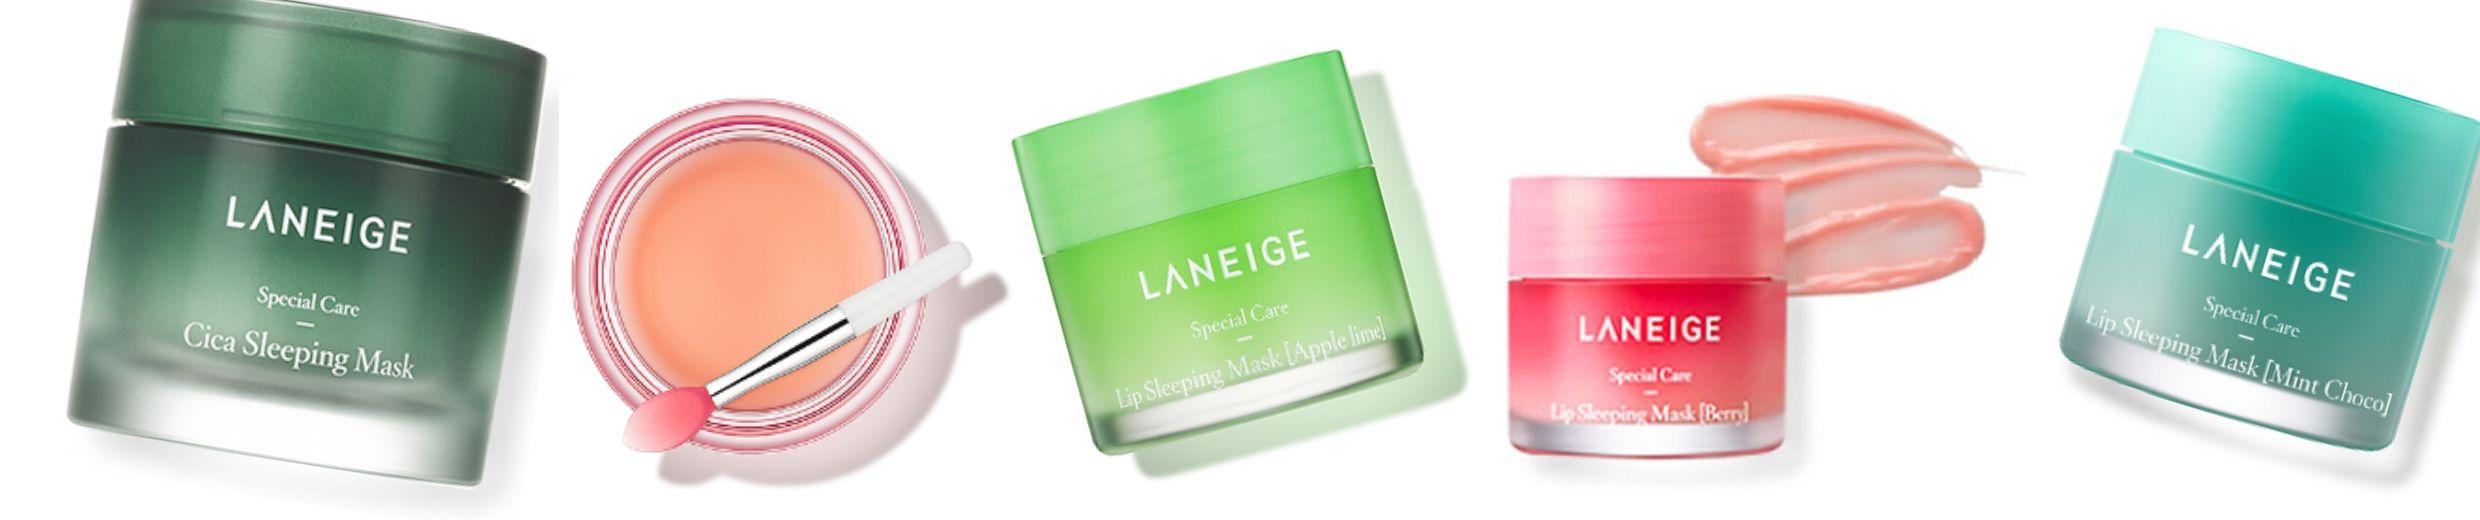 Why Laneige’s Sleeping Masks Have Made Me a Convert